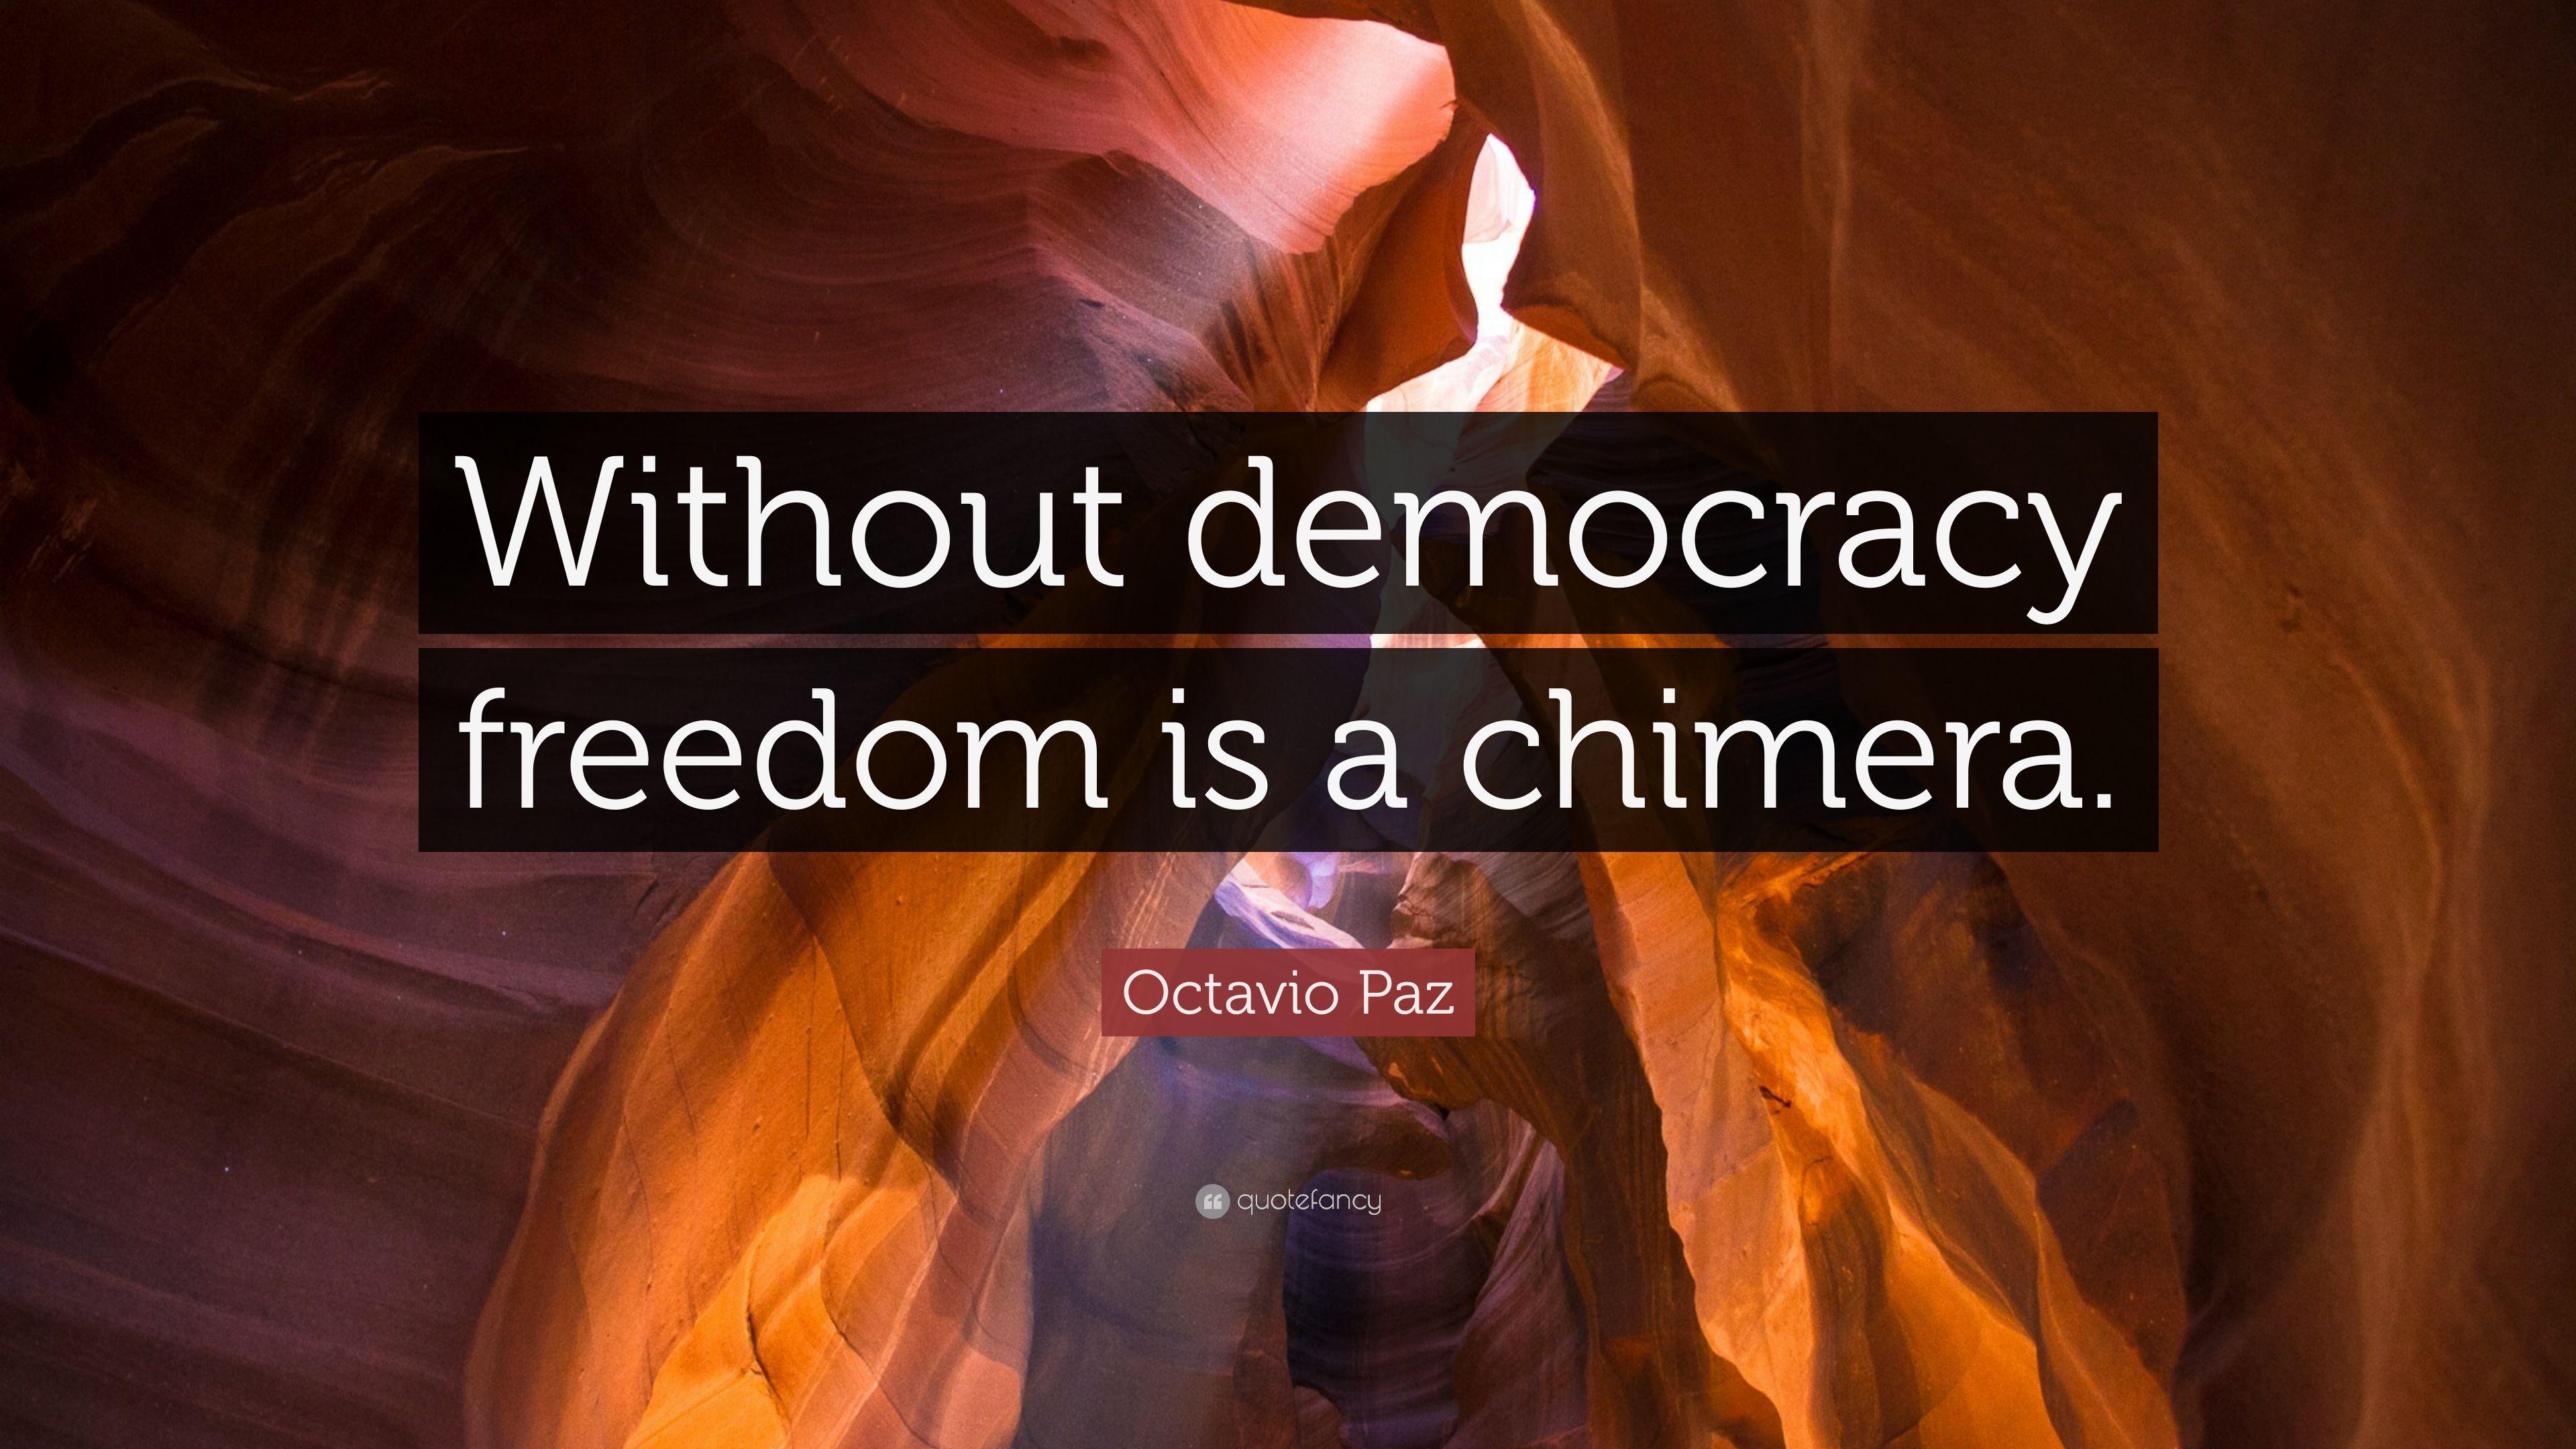 Octavio Paz Quote: “Without democracy freedom is a chimera.” 7